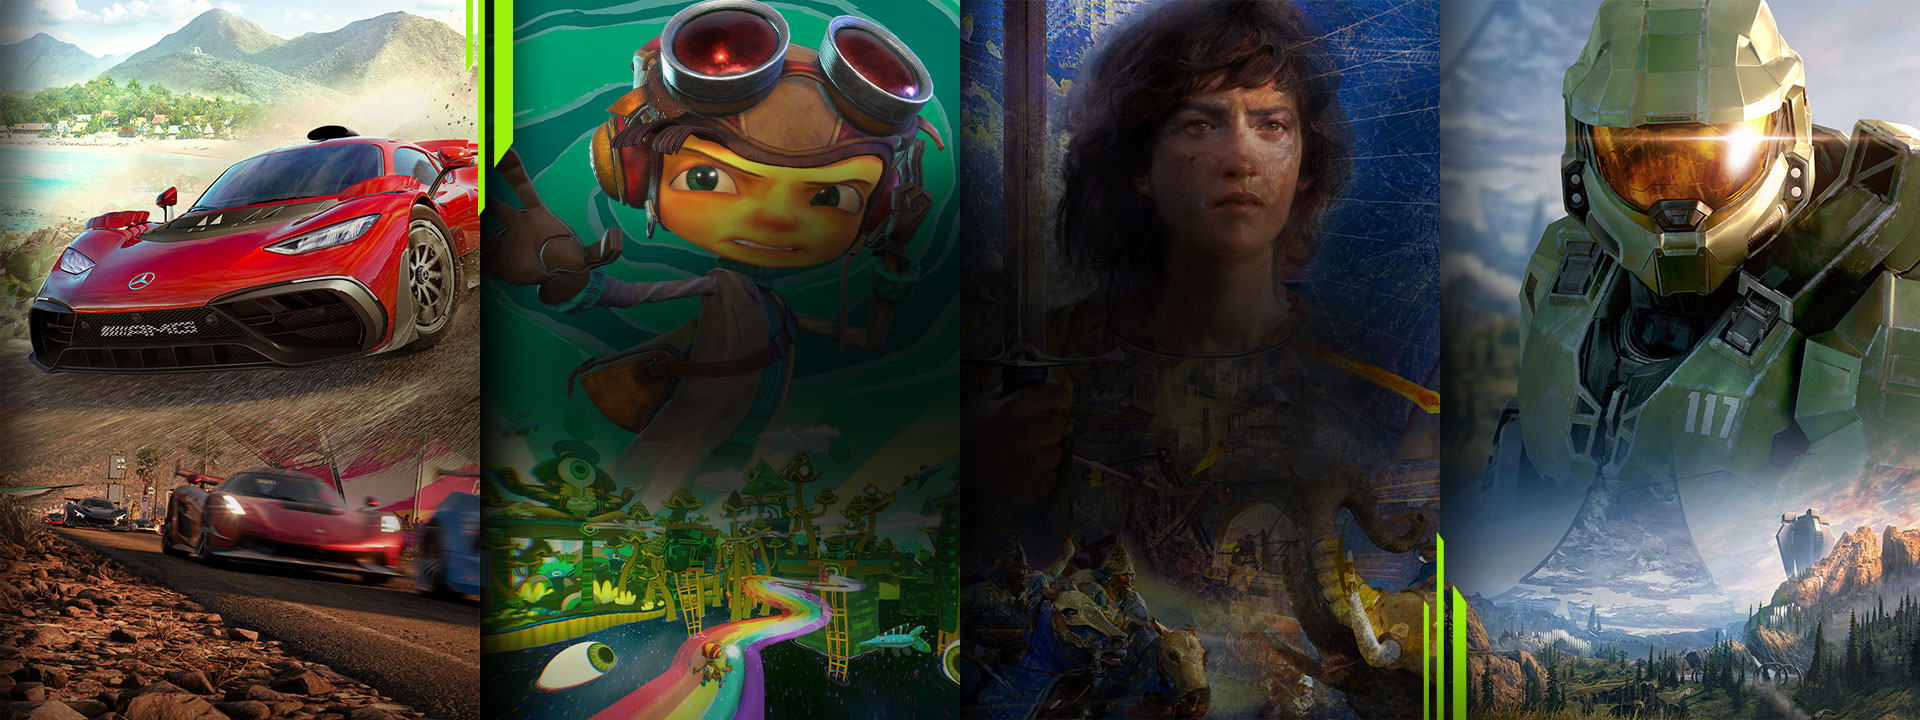 A selection of games available with Xbox Game Pass including Forza Horizon 5, Psychonauts 2, Age of Empires 4 and Halo Infinite.